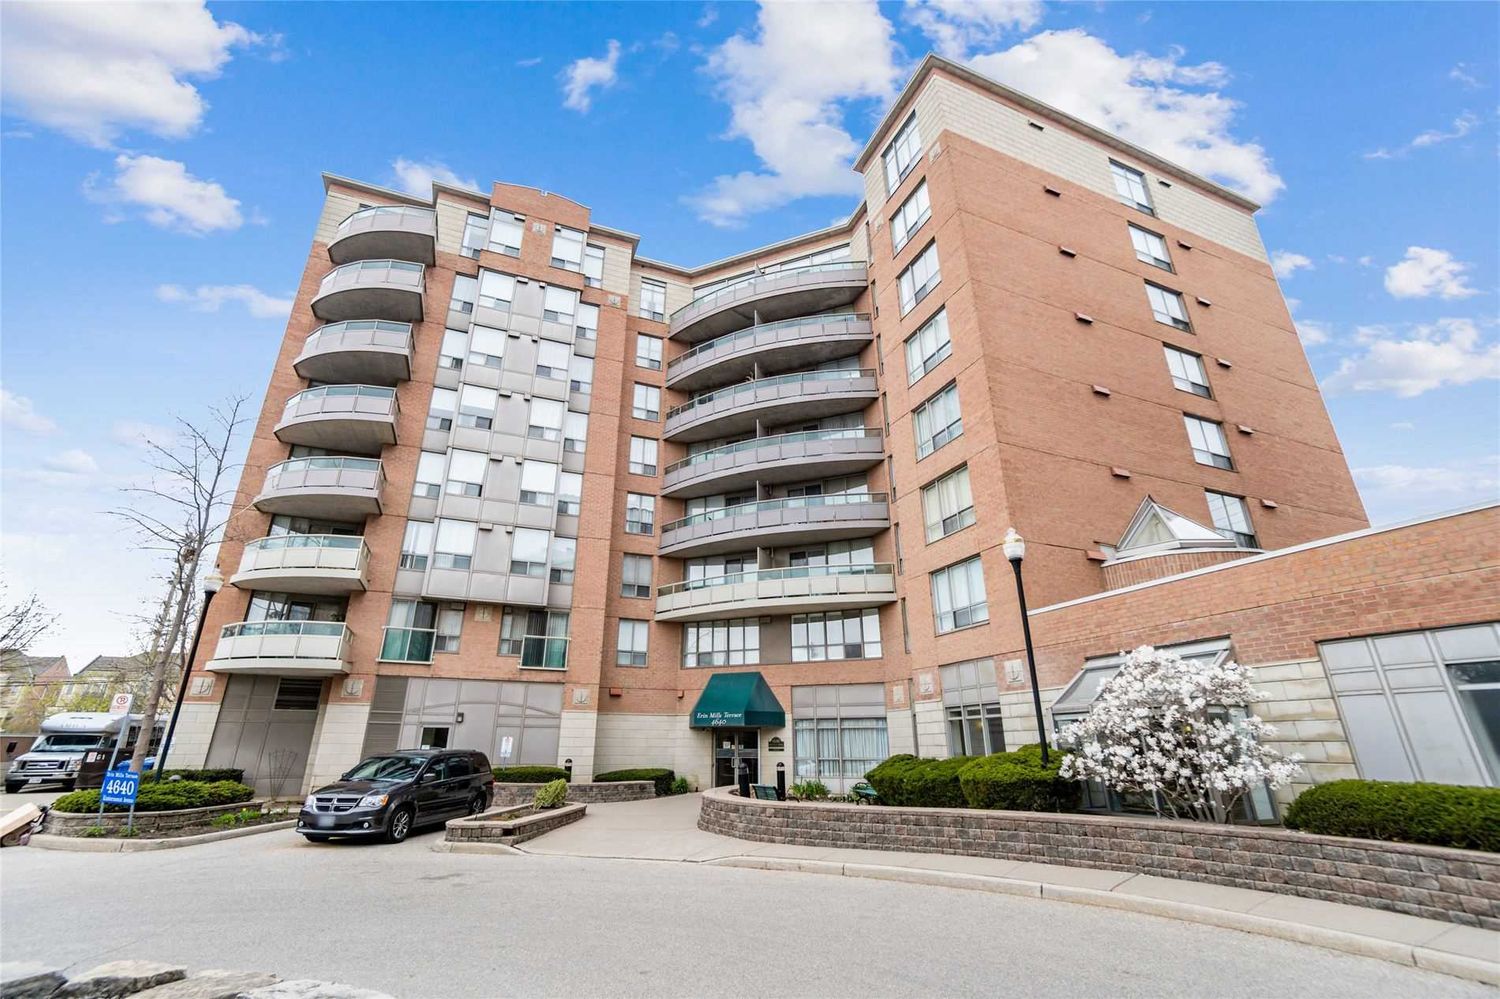 4640 Kimbermount Avenue. Erin Mills Terrace Condos is located in  Mississauga, Toronto - image #2 of 2